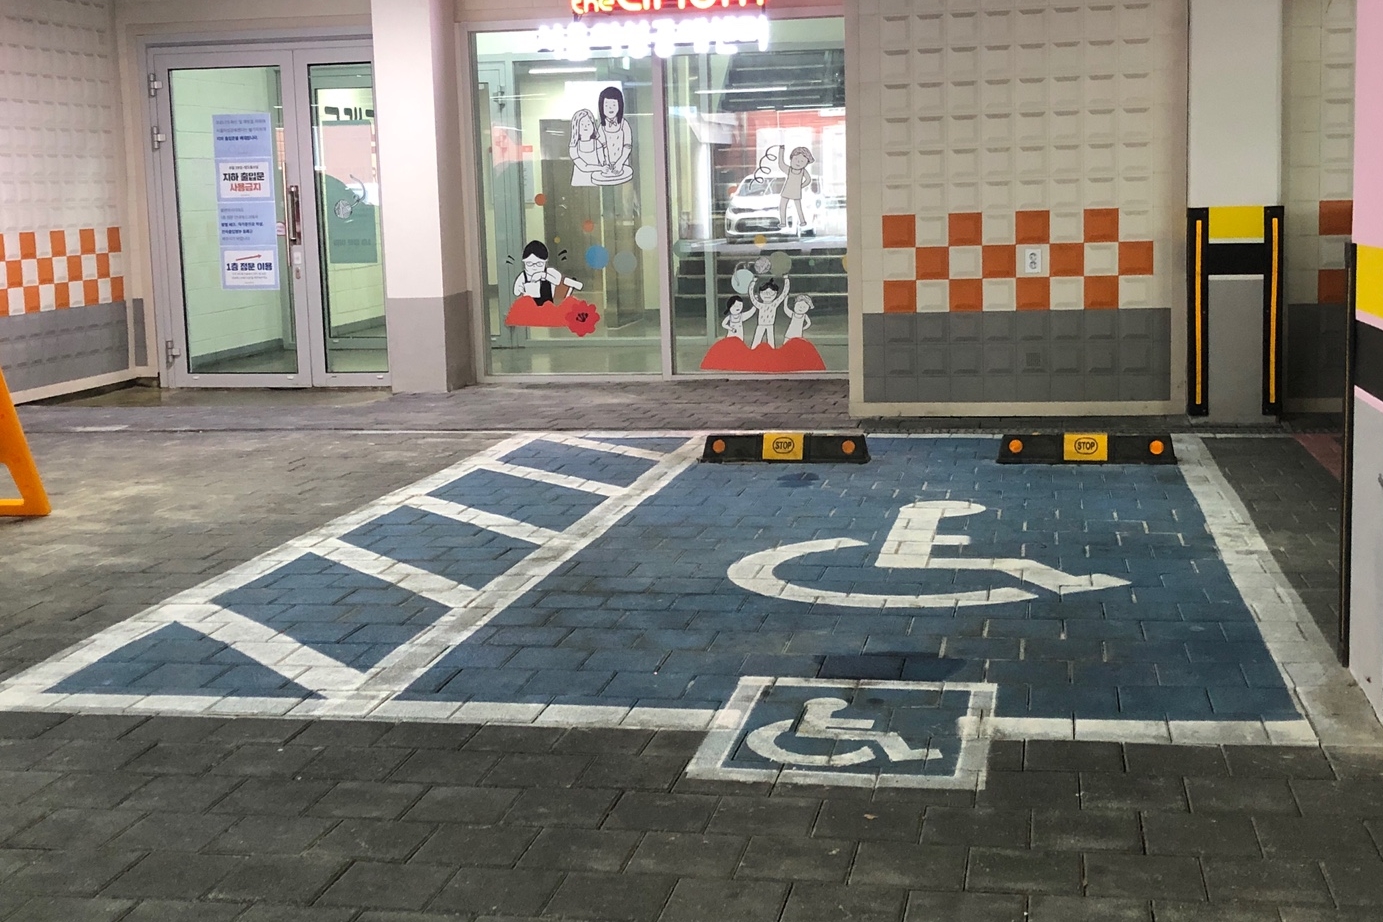 Parking facilities for persons with disabilities0 : A parking for the persons with disabilities with hatched lines
